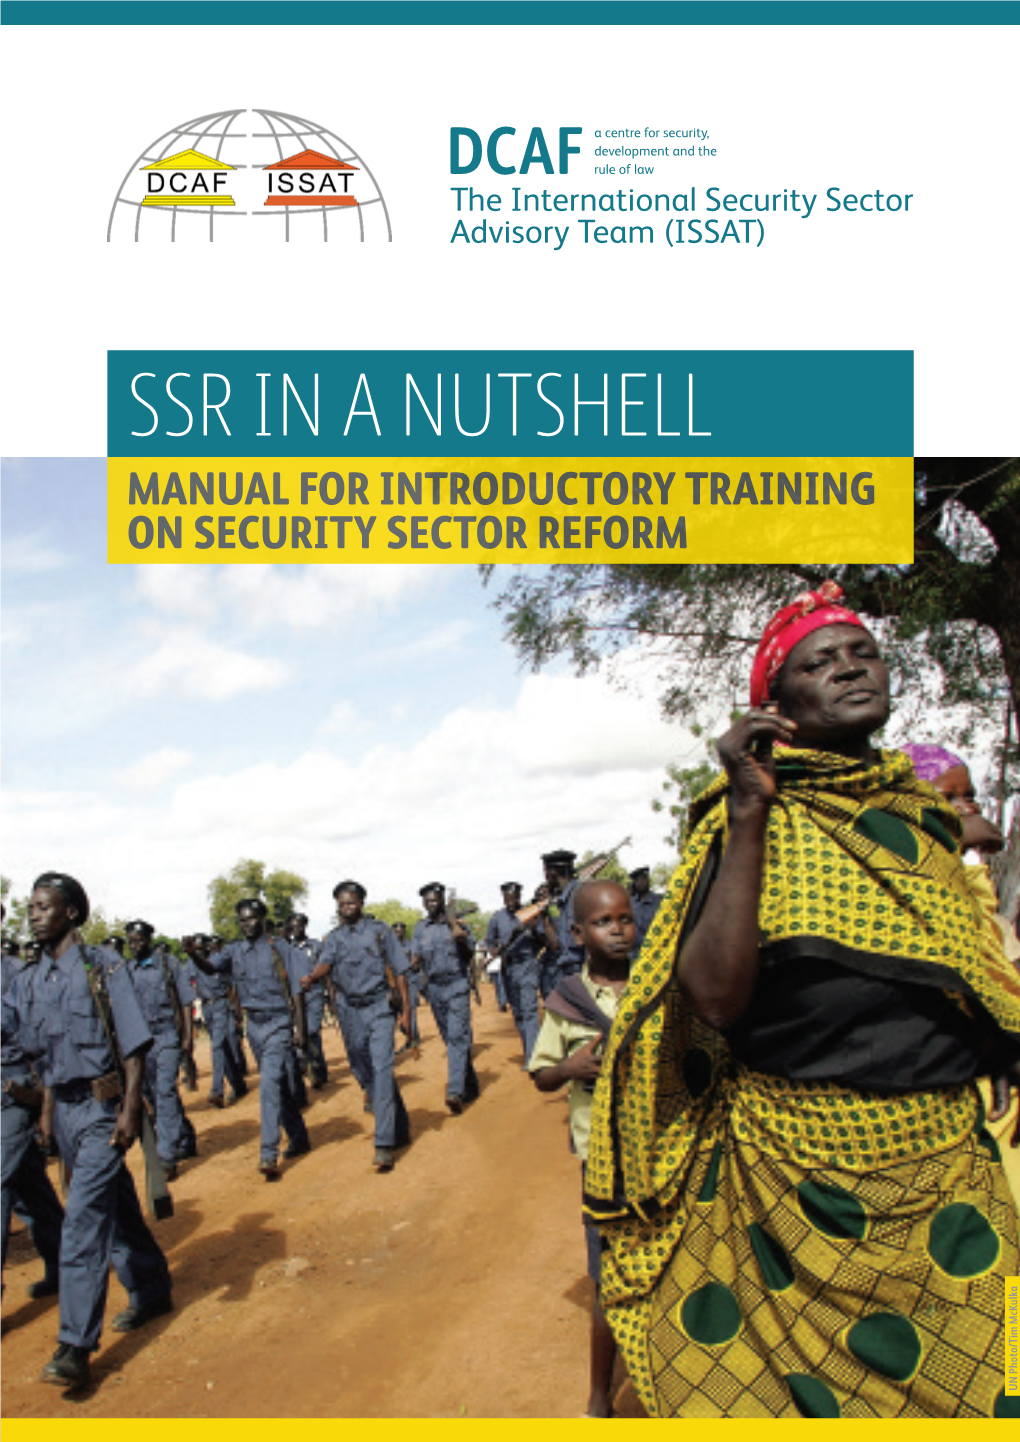 SSR in a NUTSHELL MANUAL for INTRODUCTORY TRAINING on SECURITY SECTOR REFORM UN Photo/Tim Mckulka